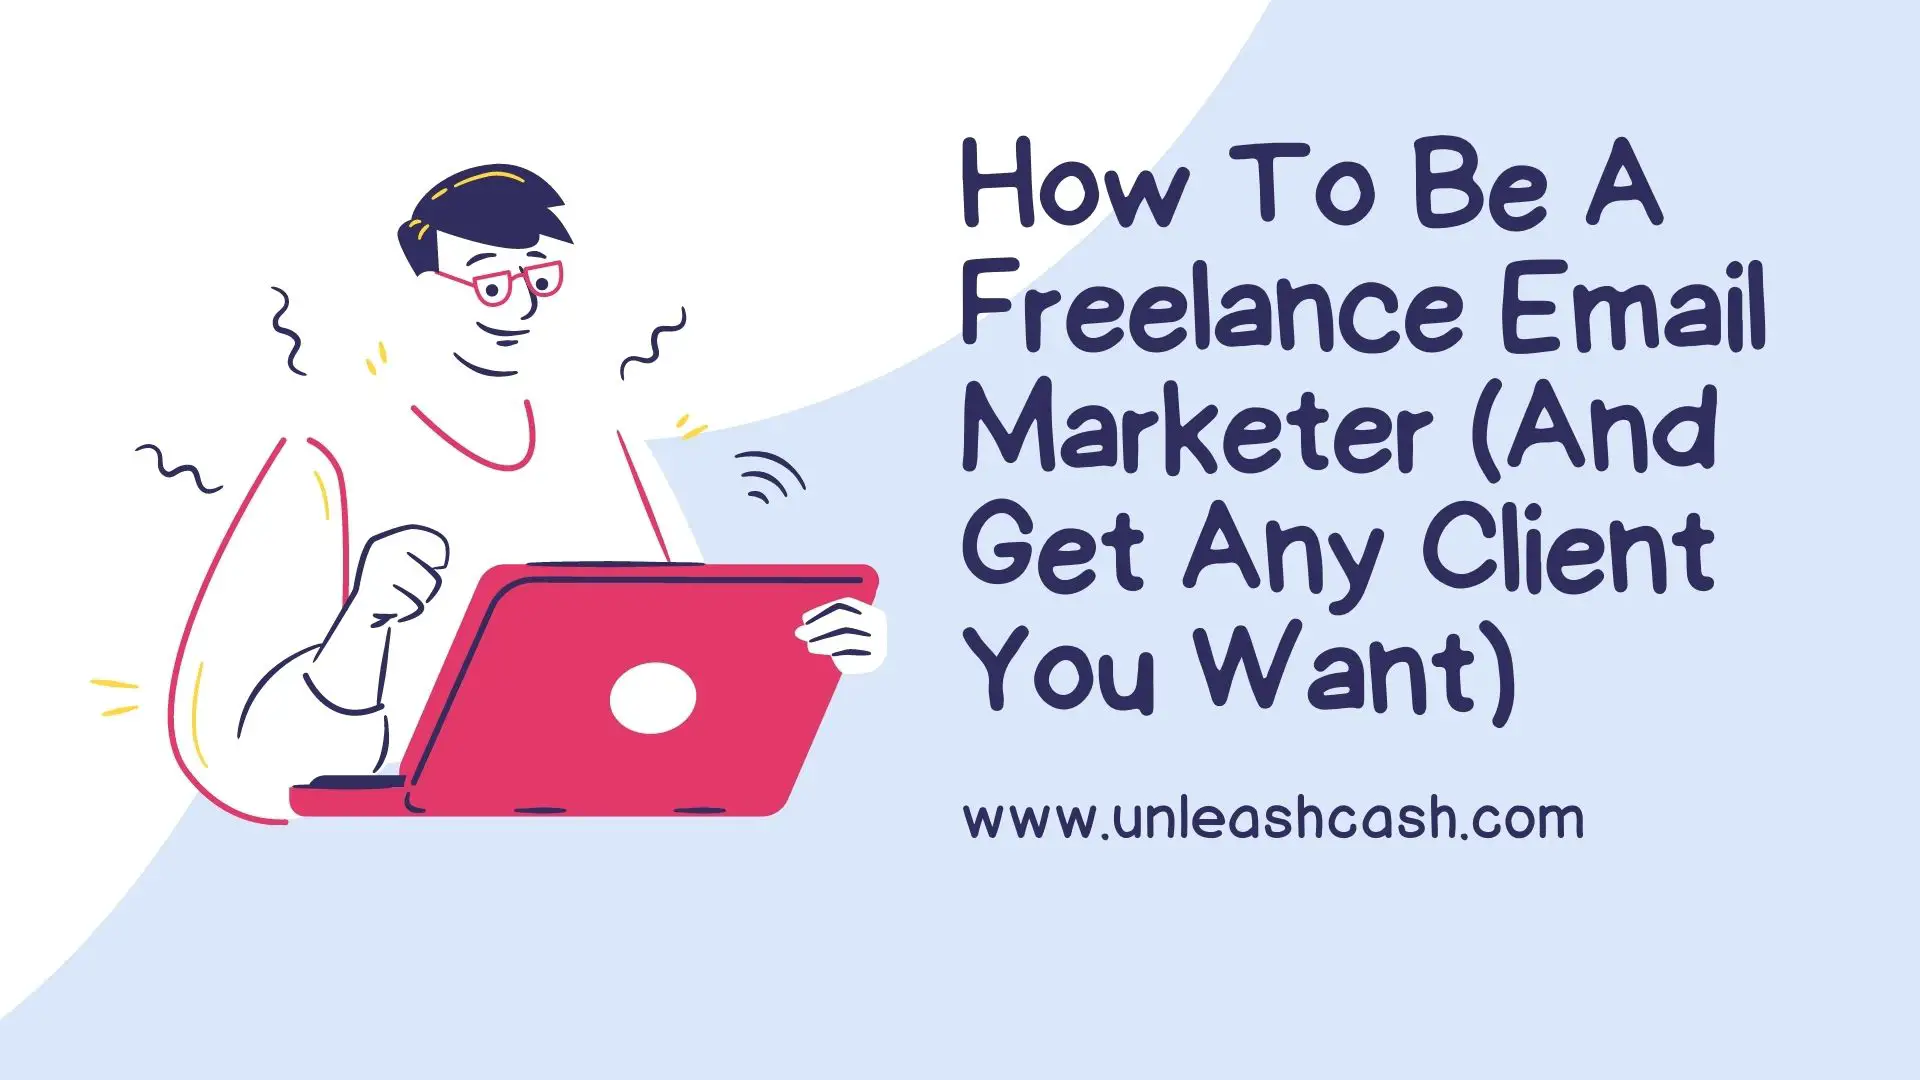 How To Be A Freelance Email Marketer (And Get Any Client You Want)